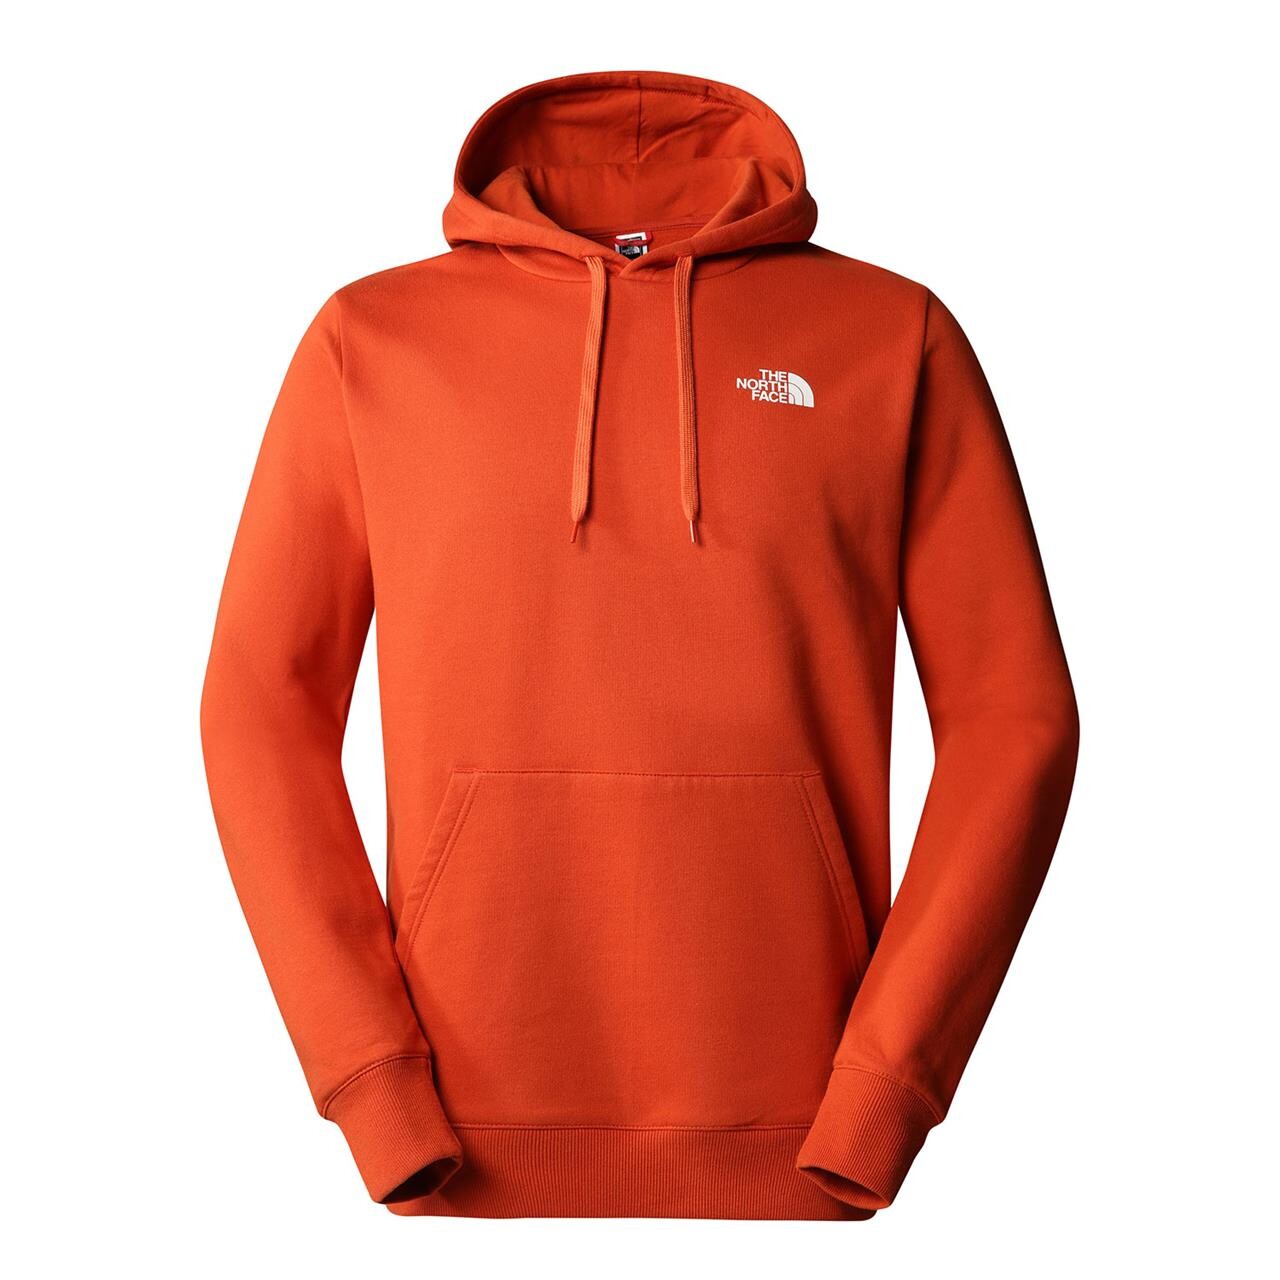 Billede af The North Face Mens Outdoor Graphic Hoodie Light (Orange (RUSTED BRONZE) Small)